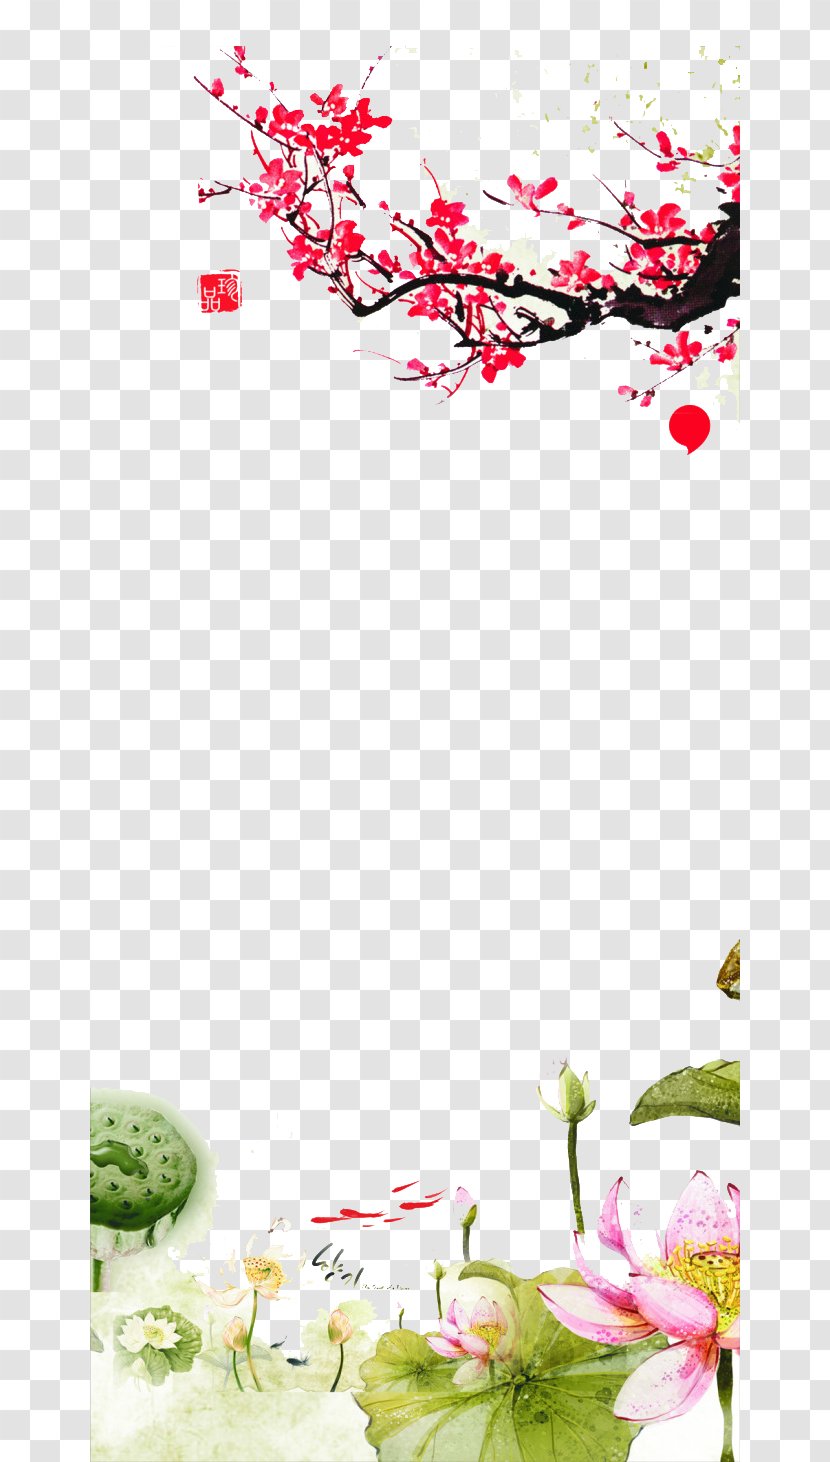 Tong Shu Ink Chinese Zodiac Tung Shing - Floral Design - Plum Blossom Lotus Background Transparent PNG